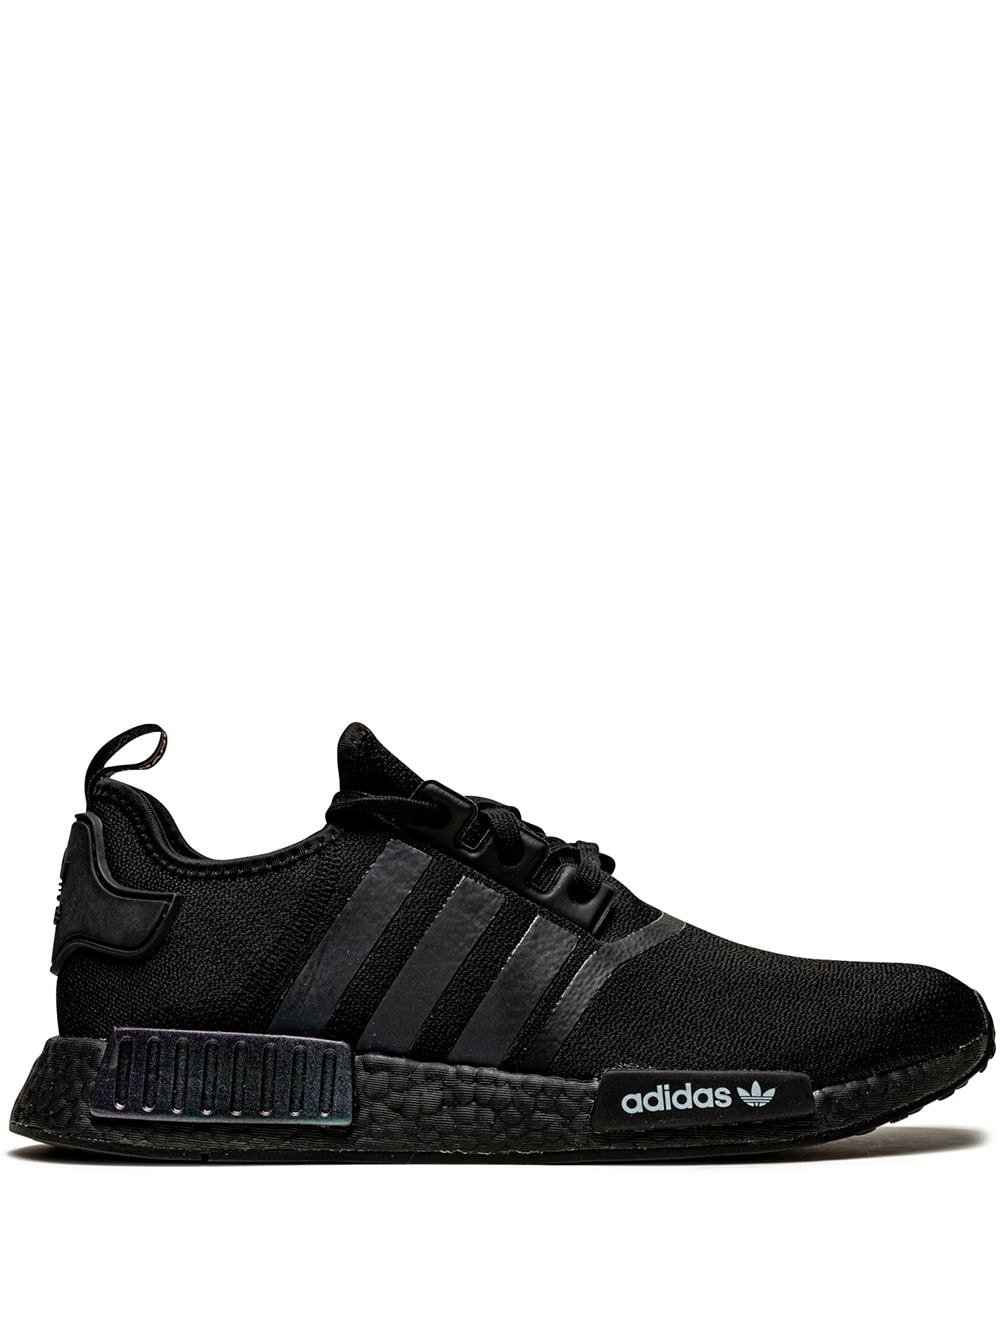 Image 1 of adidas NMD_R1 low-top sneakers